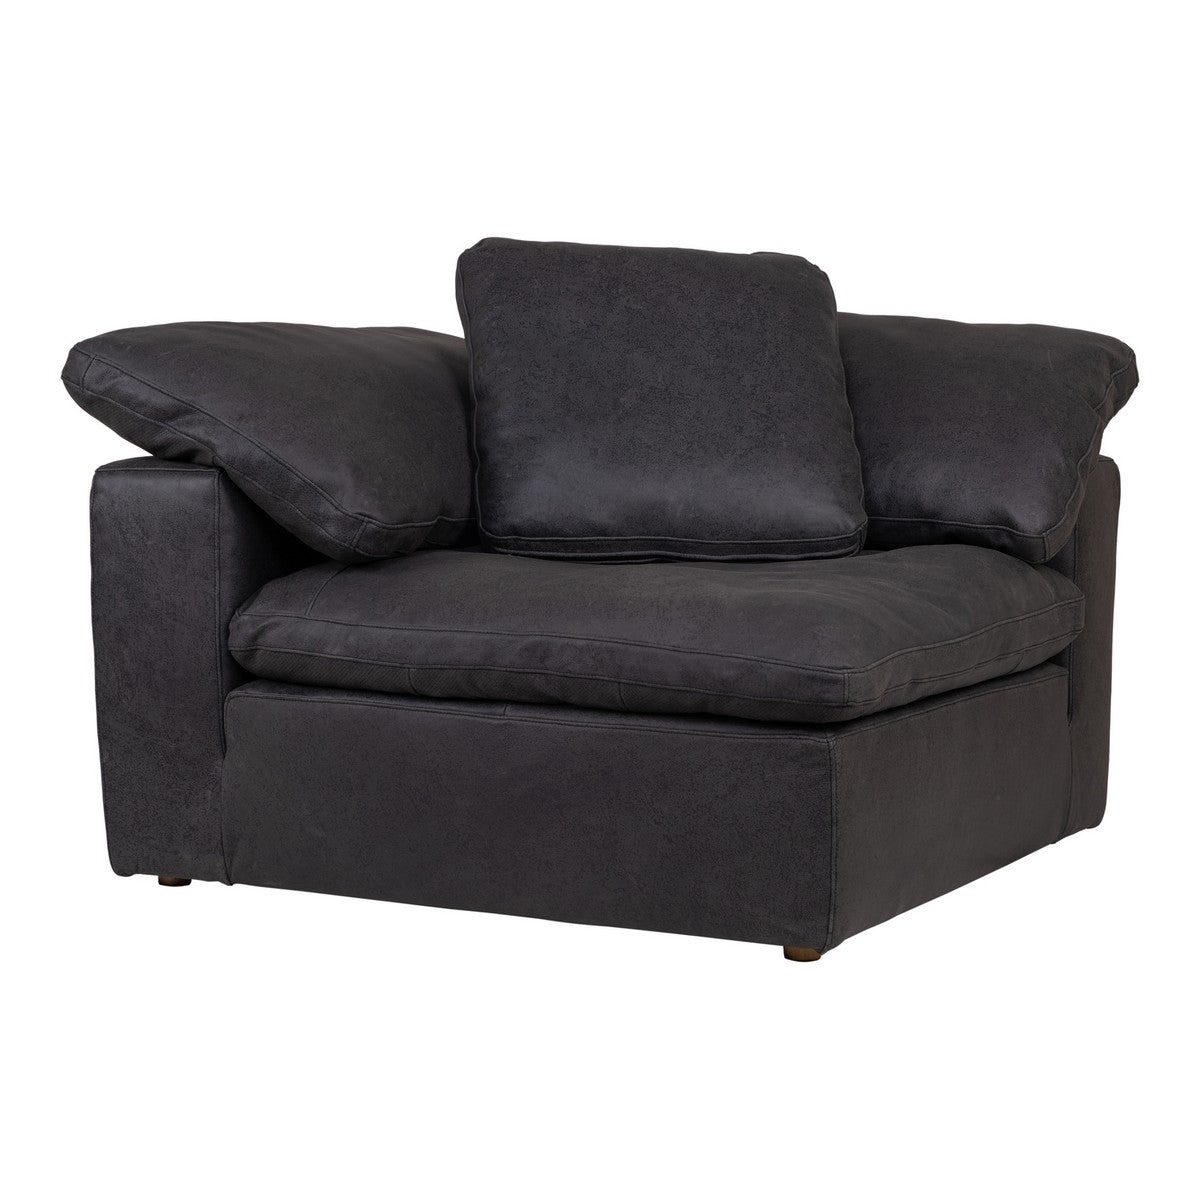 Moe's Home Collection Clay Corner Chair Nubuck Leather Black - YJ-1004-02